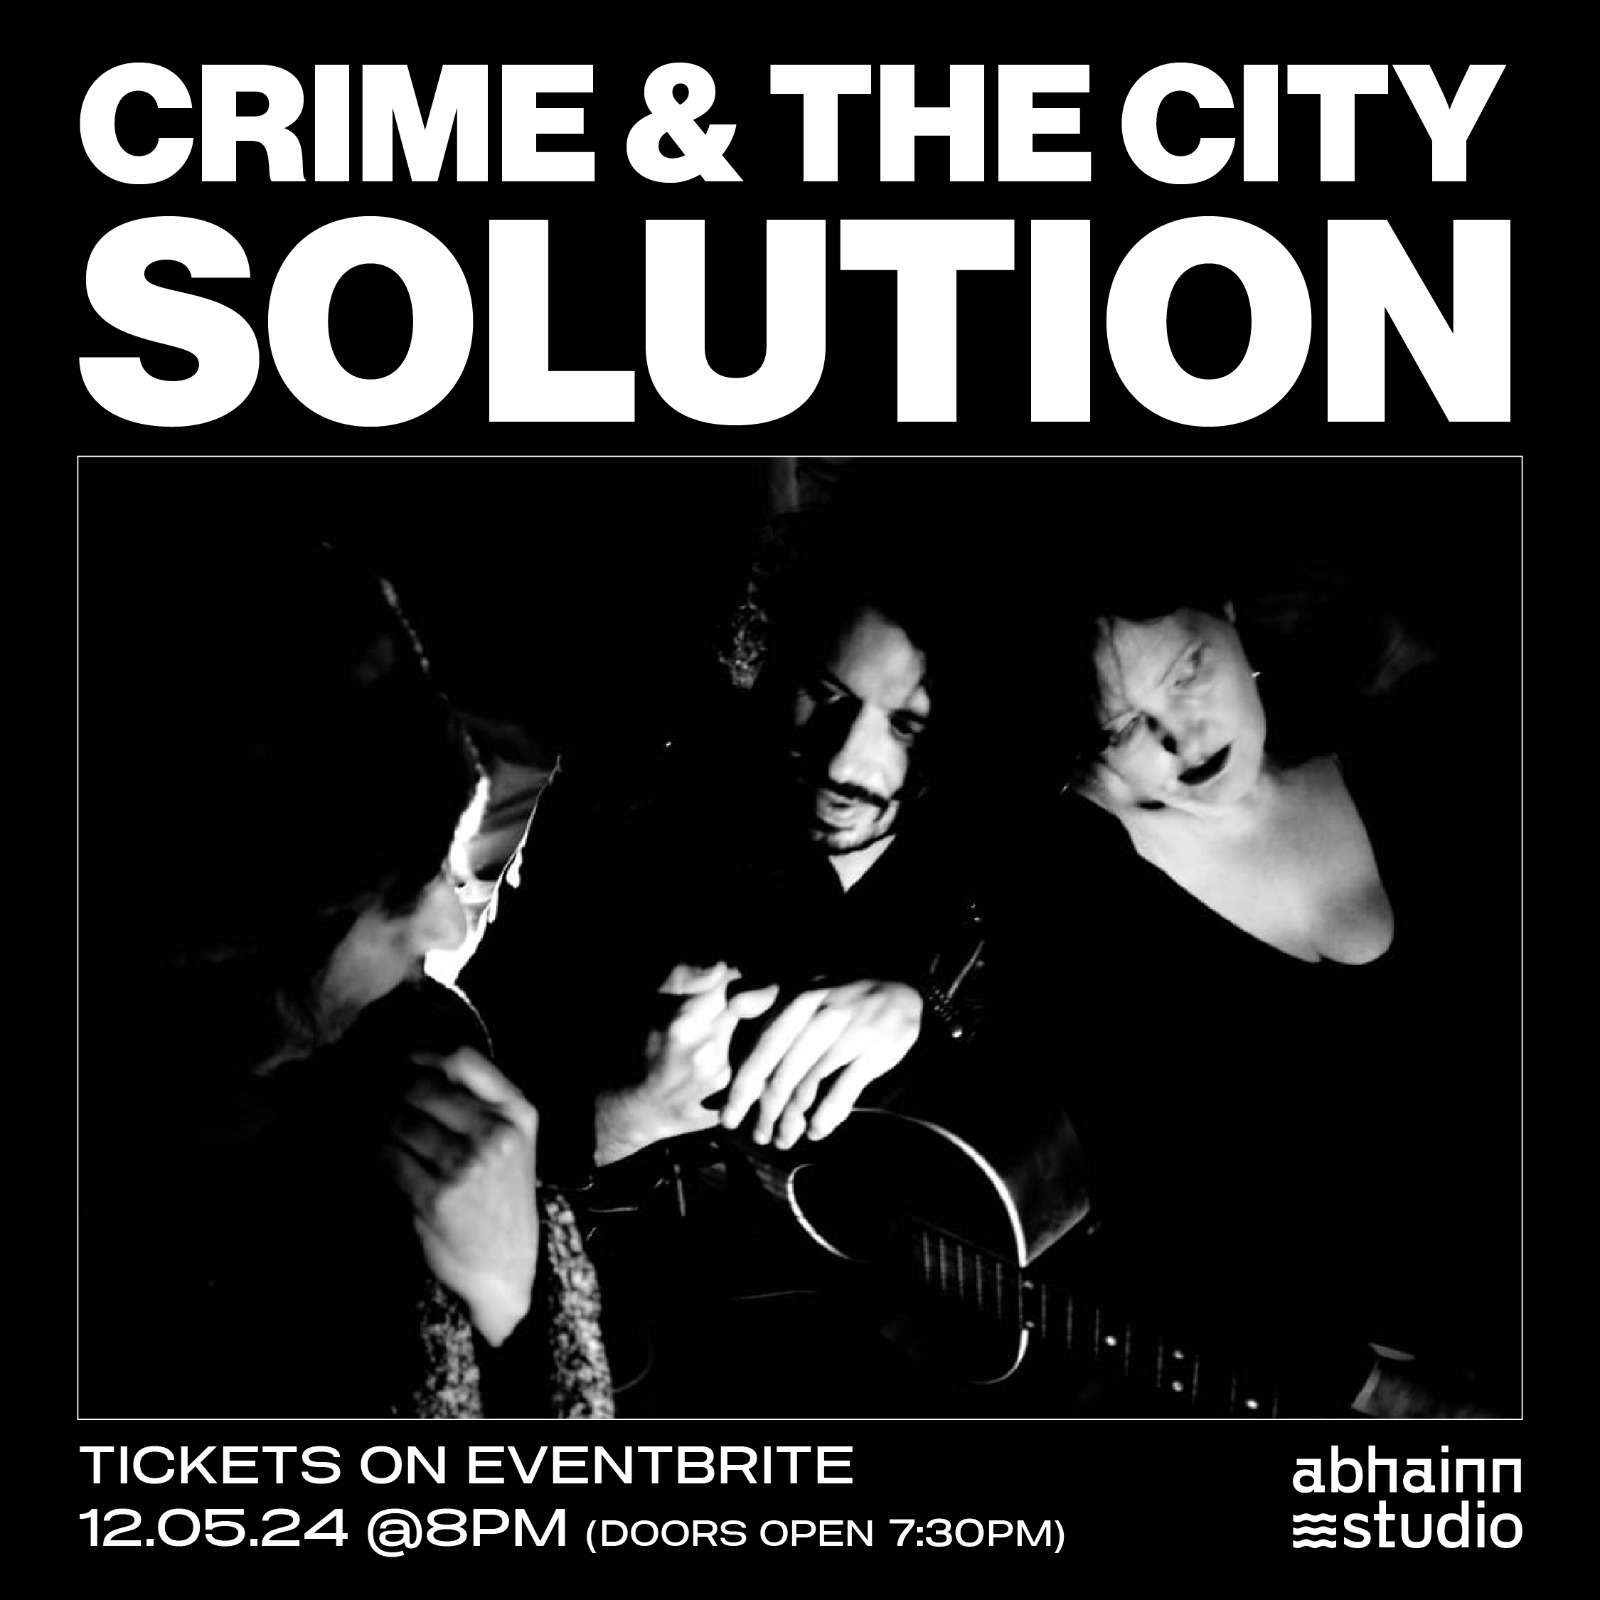 Band members of Crime & The City Solution